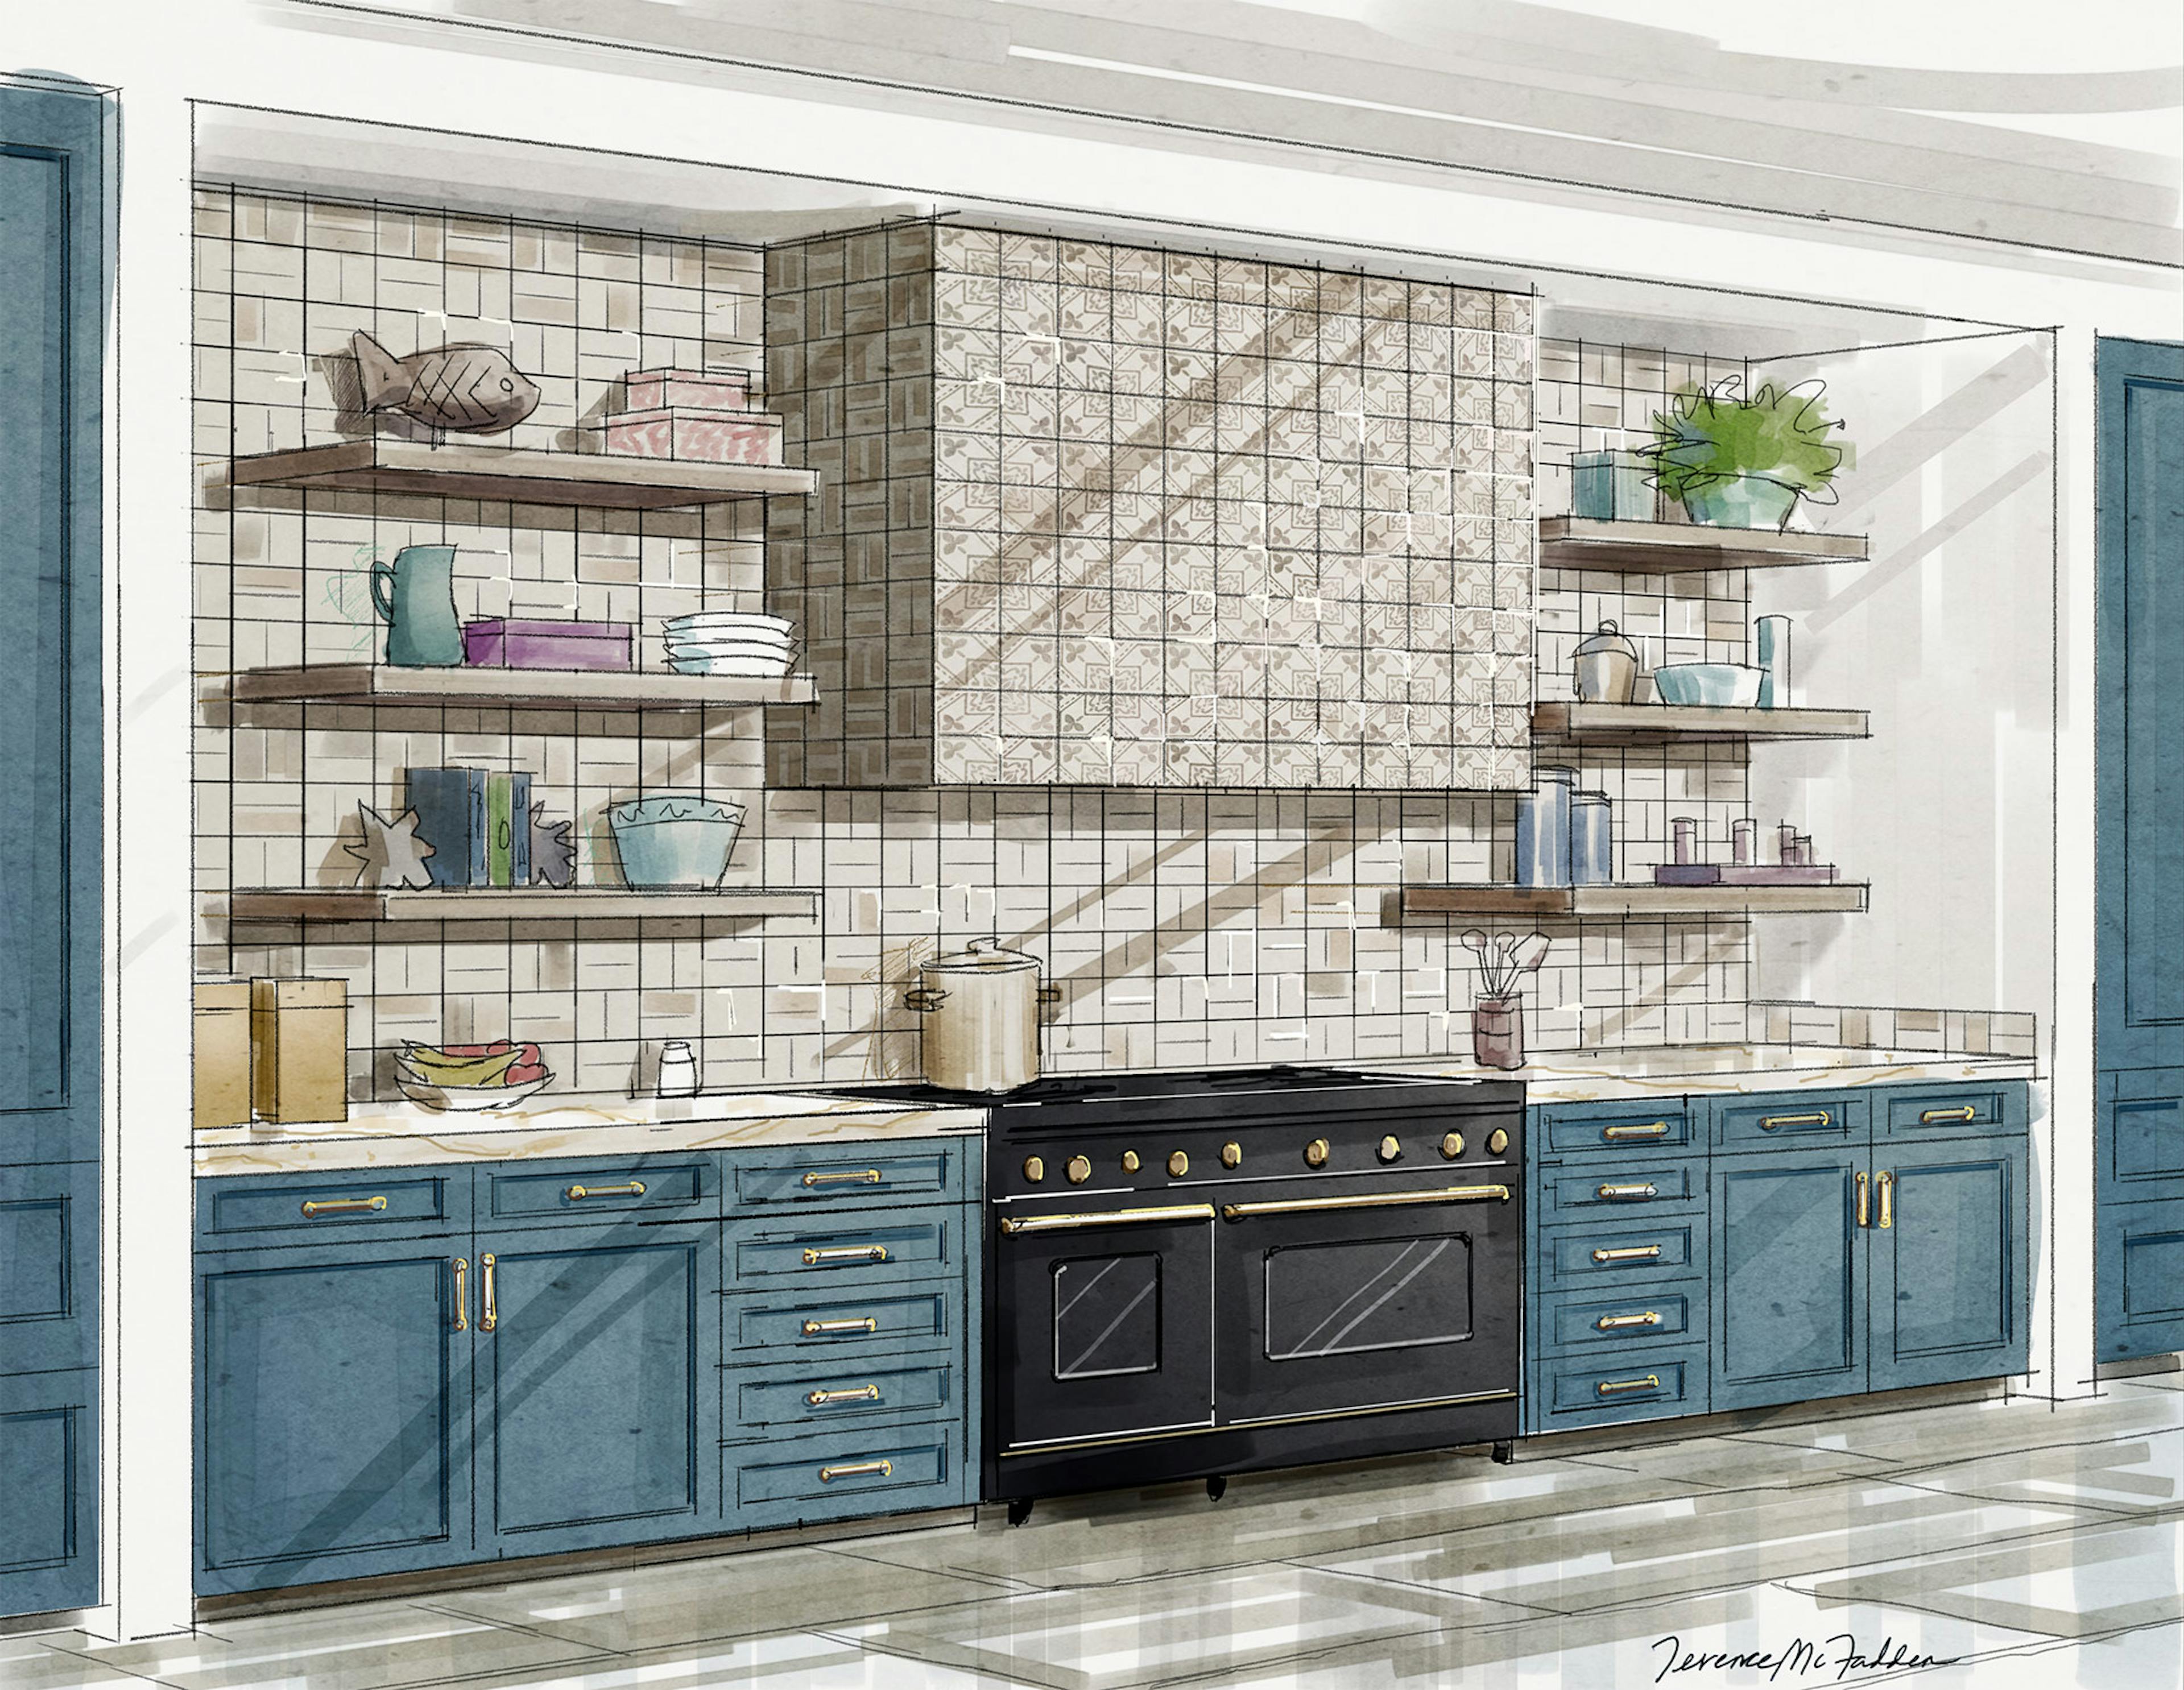 Concept sketch of a kitchen